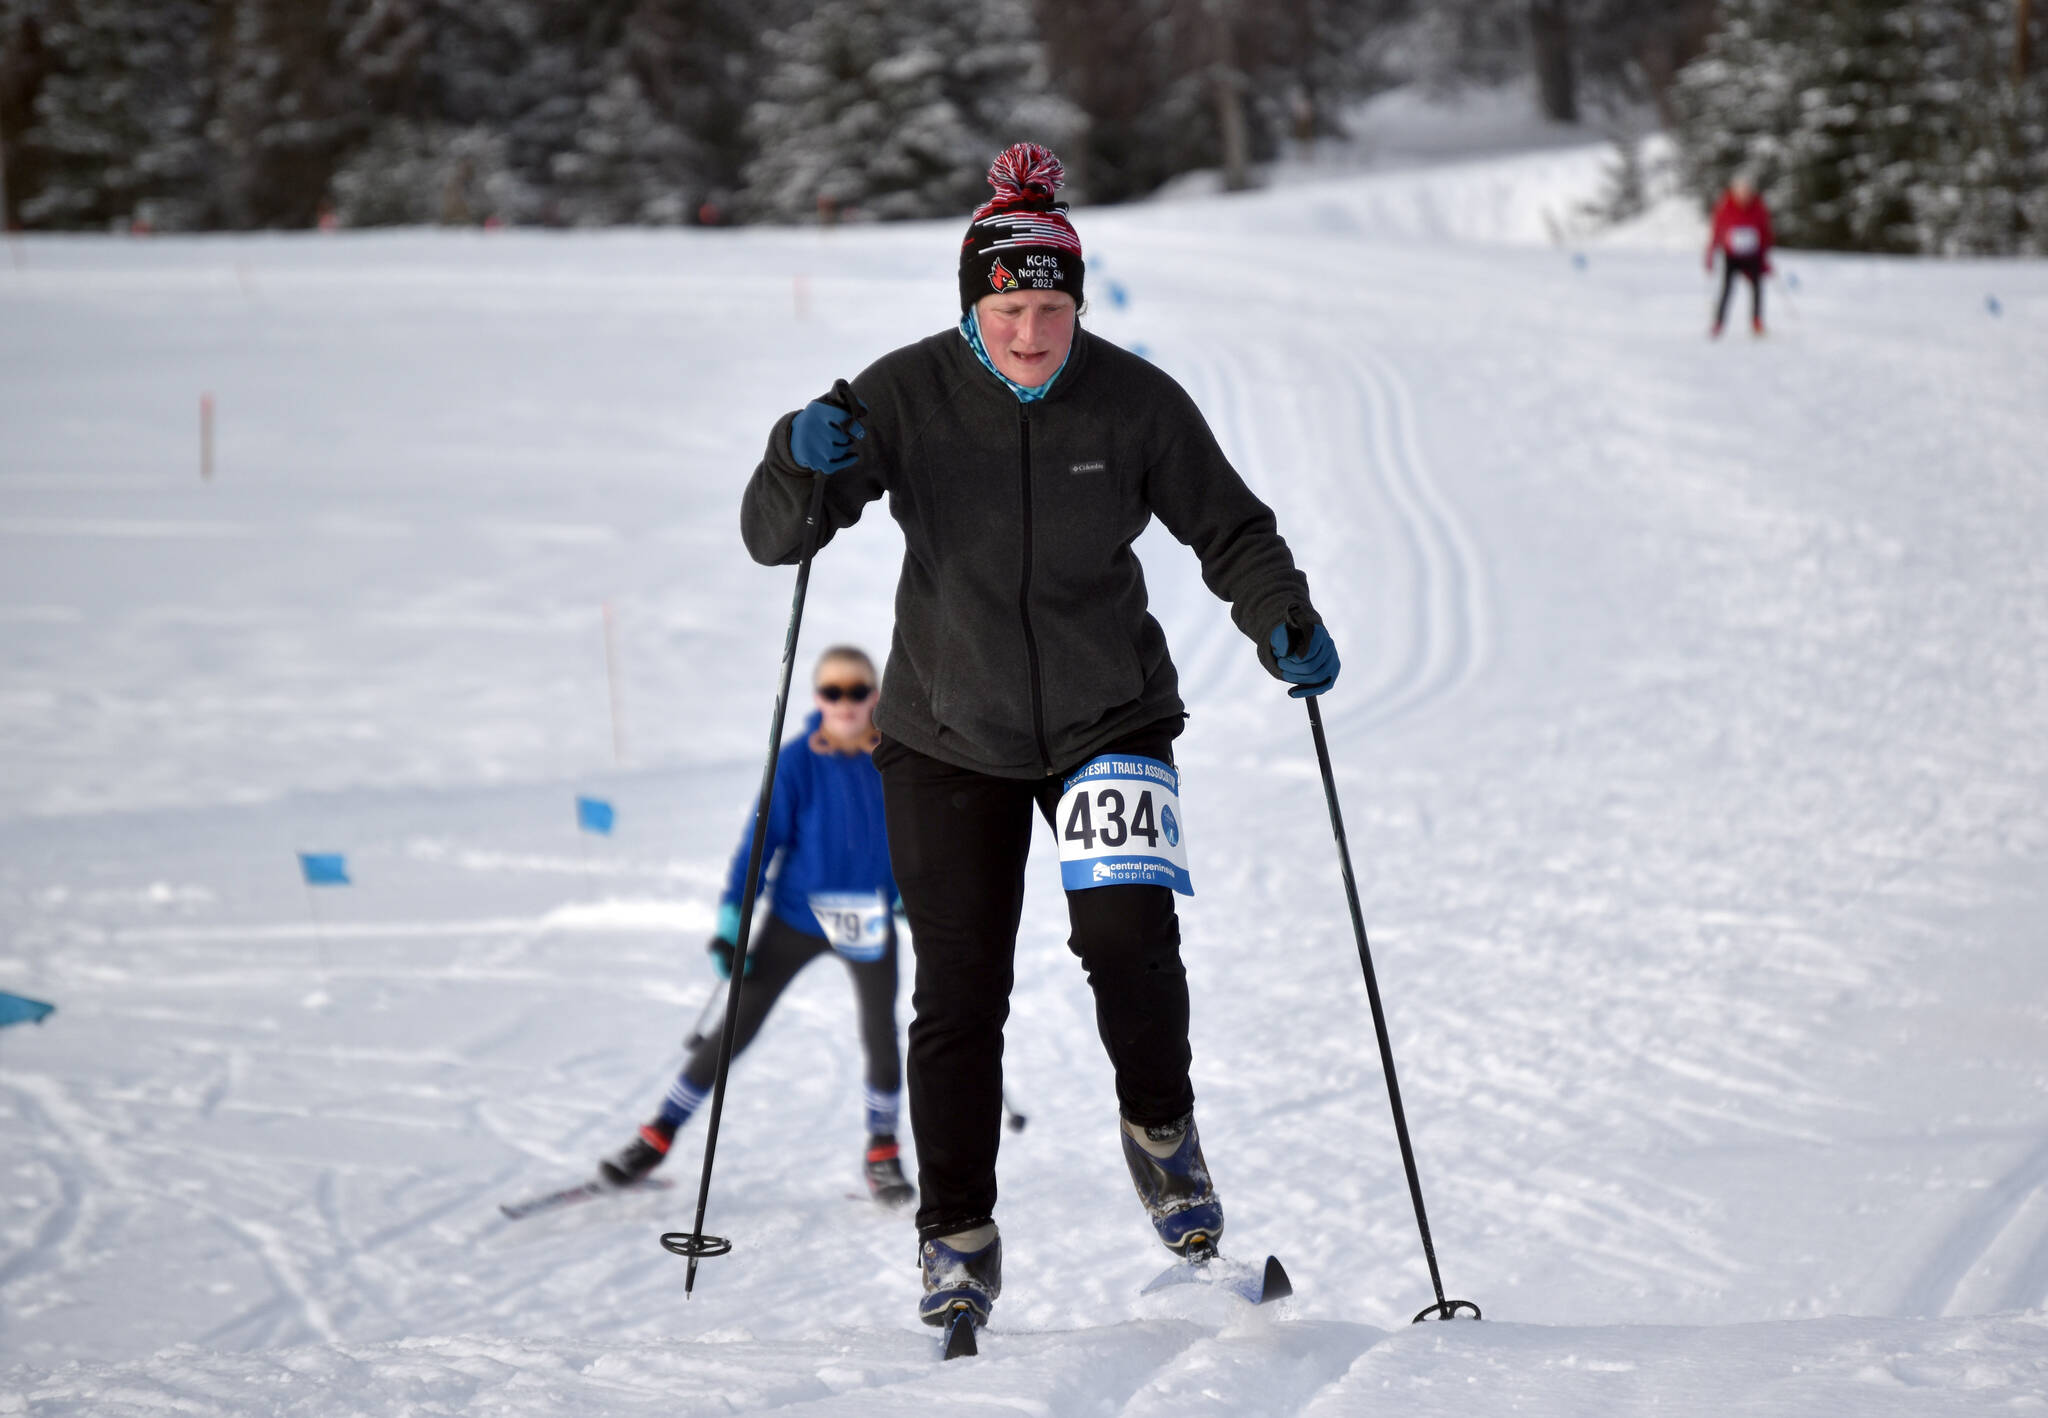 Julie Laker, the winner of the 5-kilometer classic race, climbs a hill at the 19th annual Ski For Women on Sunday, Feb. 12, 2023, at Tsalteshi Trails just outside of Soldotna, Alaska. (Photo by Jeff Helminiak/Peninsula Clarion)